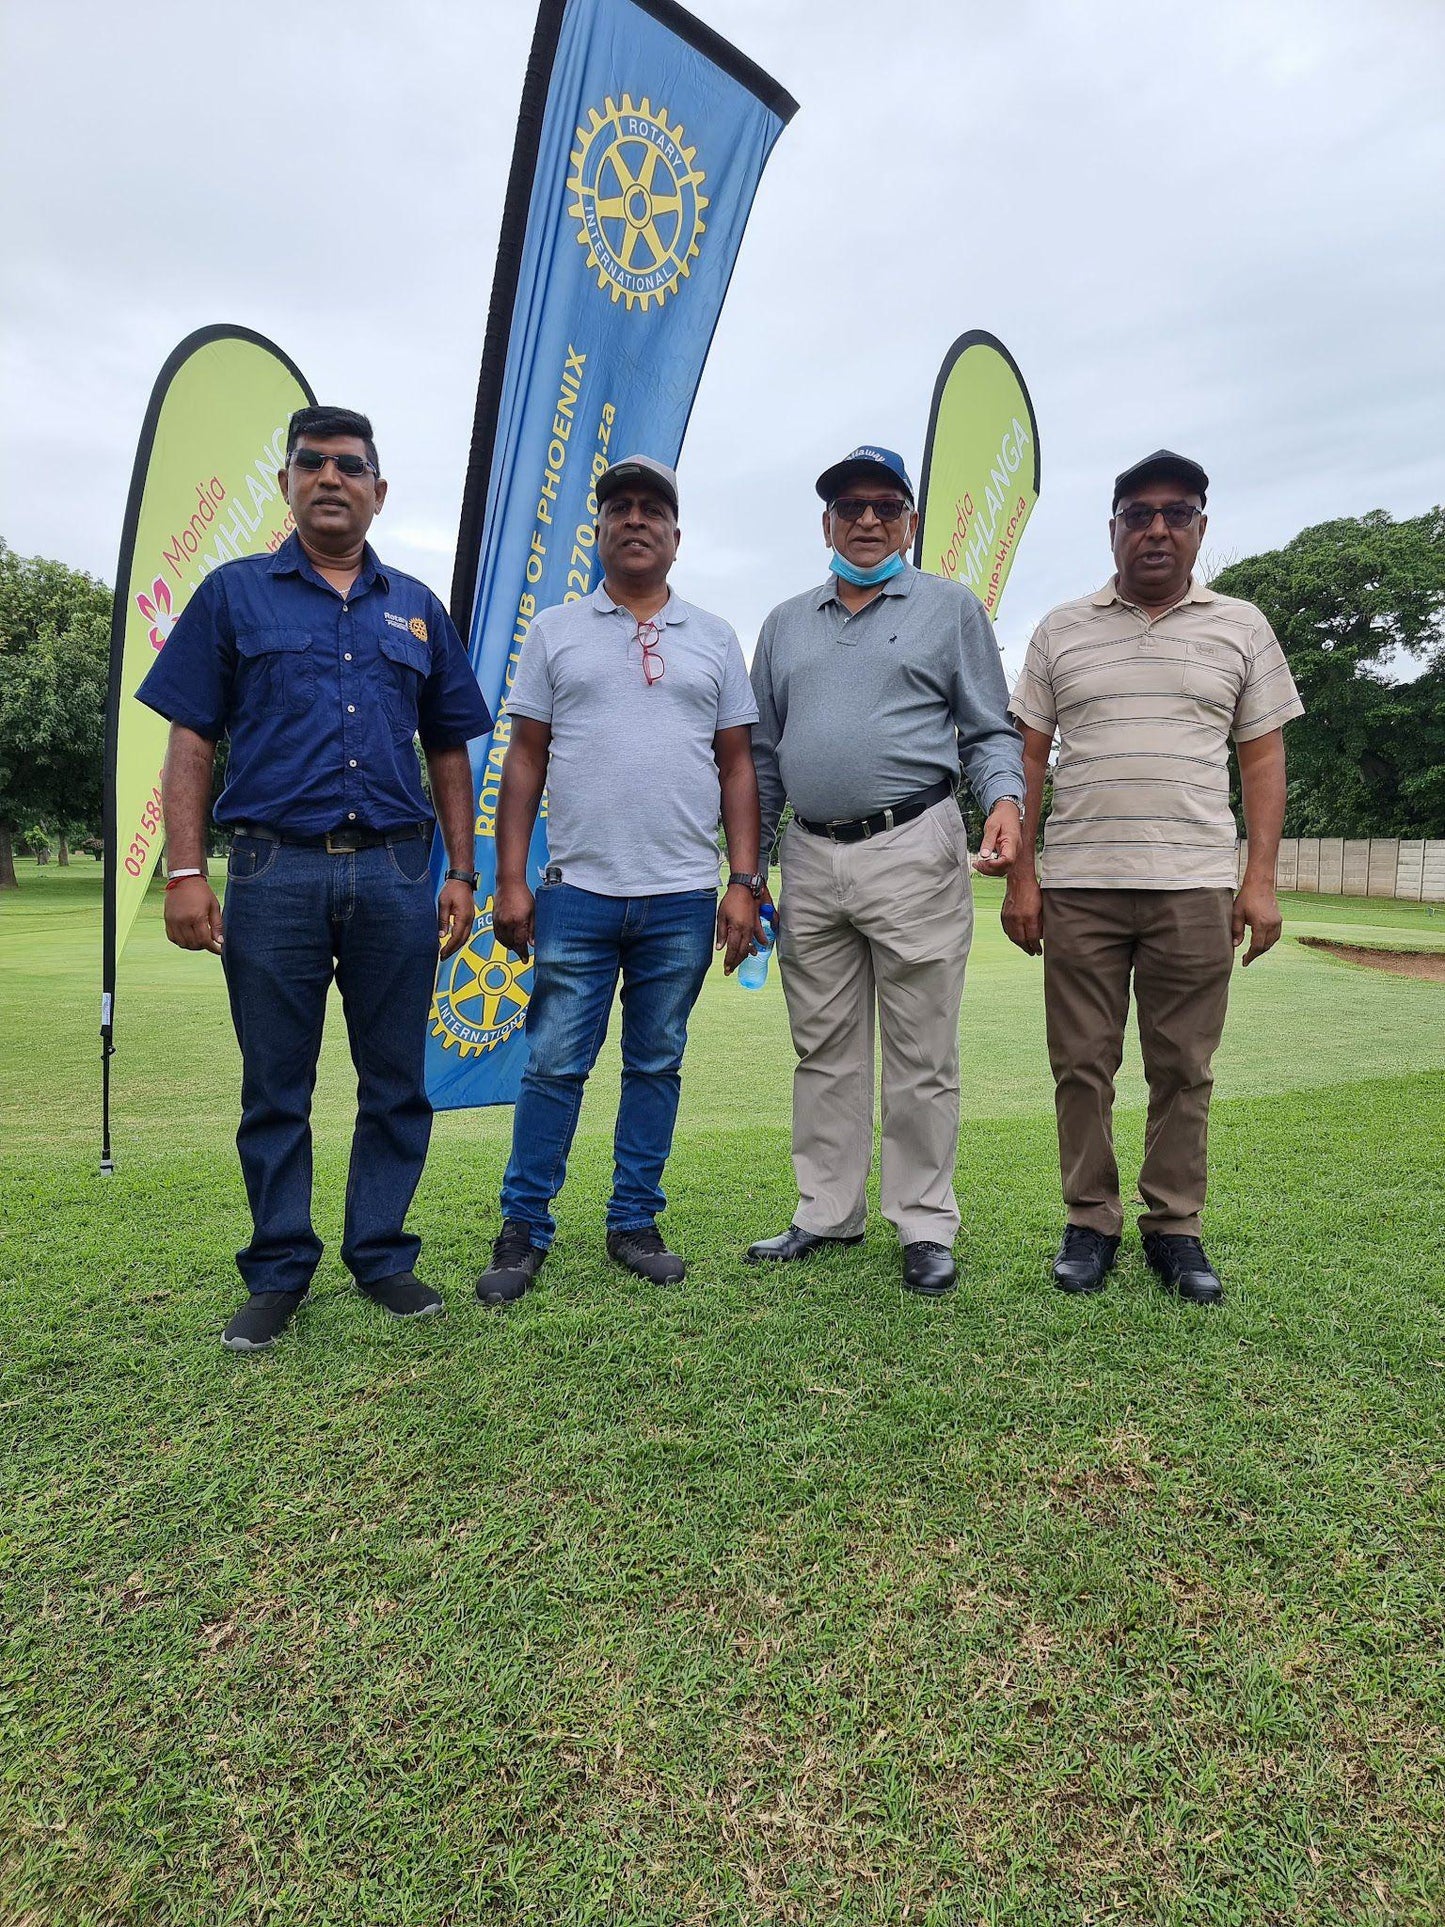 Complementary Colors, Ball Game, Sport, Golfing, Person, Face, Group, Frontal Face, Male, Adult, Sunglasses, Eyes Closed, Papwa Sewgolum Golf Course, 256 New Germany Rd, Recreation, Durban, 4090